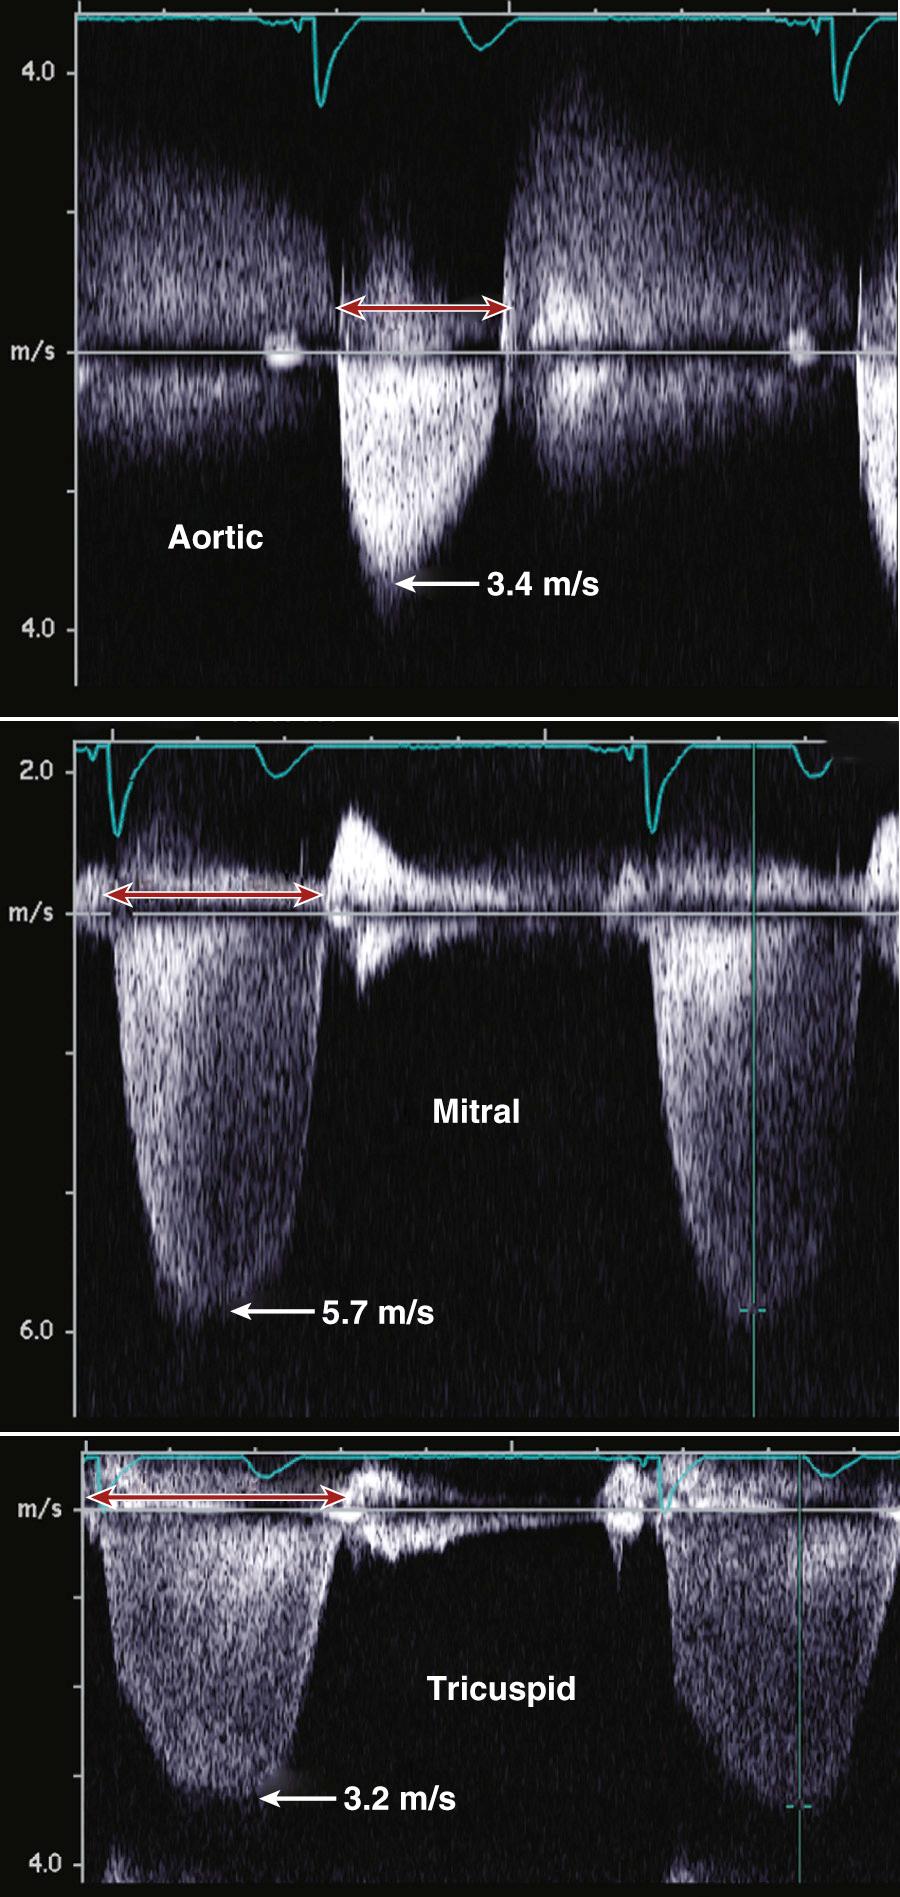 Fig. 11.10, Correct identification of the aortic jet.